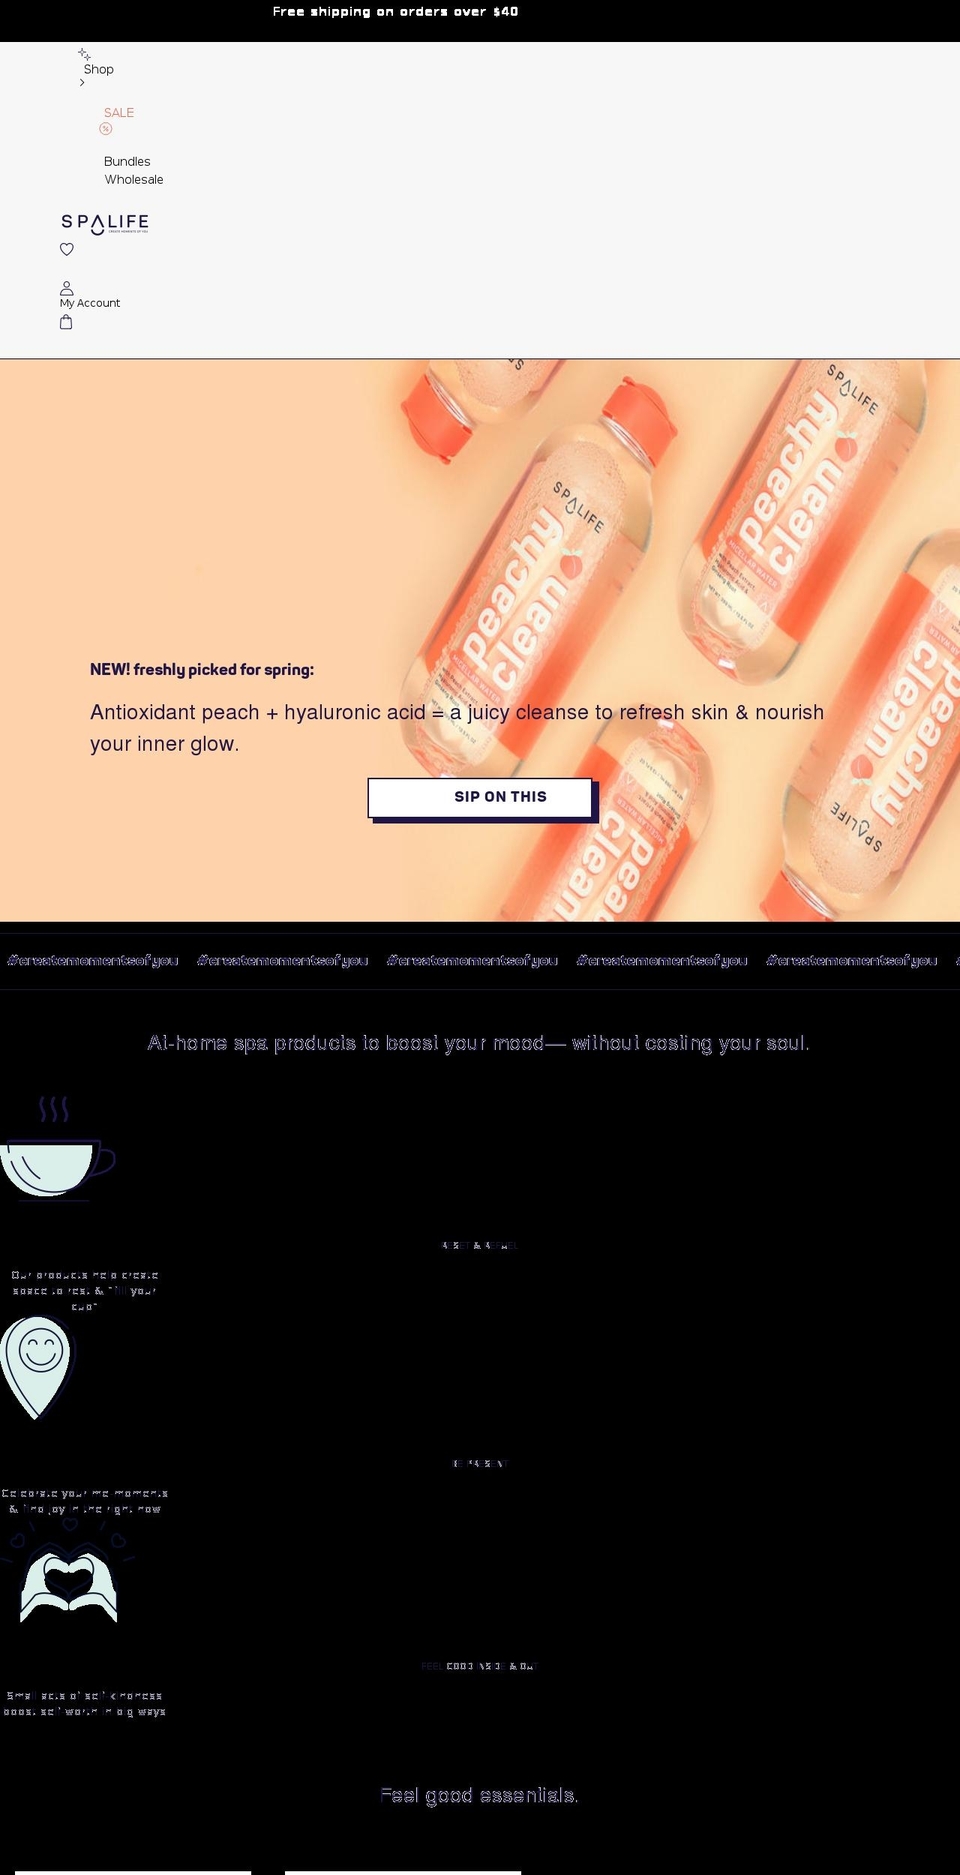 Influence Shopify theme site example spalifebeauty.com